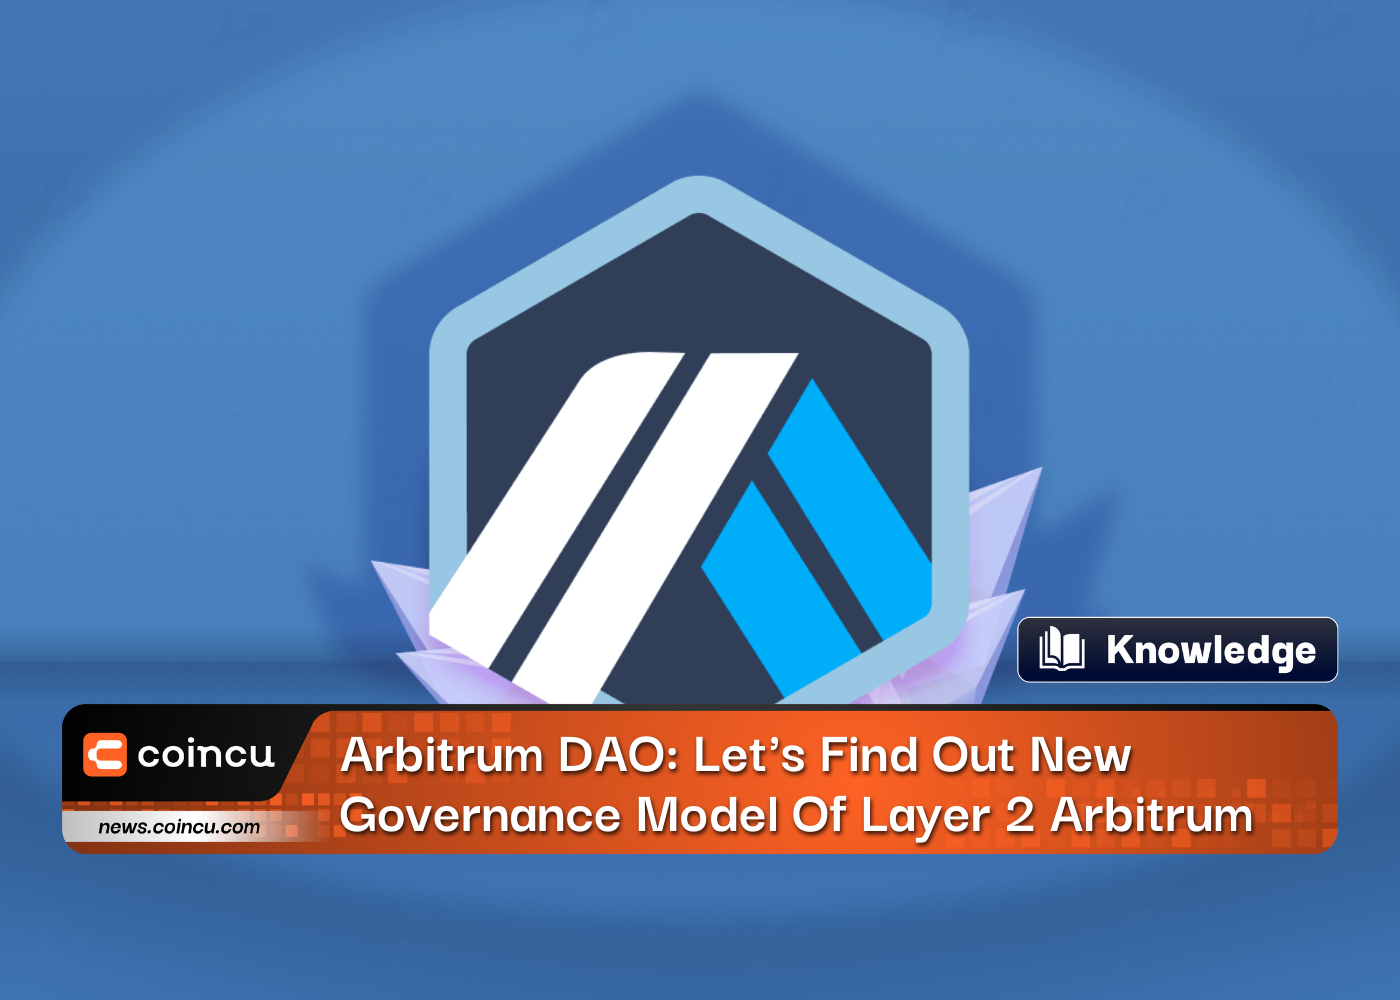 Arbitrum DAO: Let's Find Out New Governance Model Of Layer 2 Arbitrum